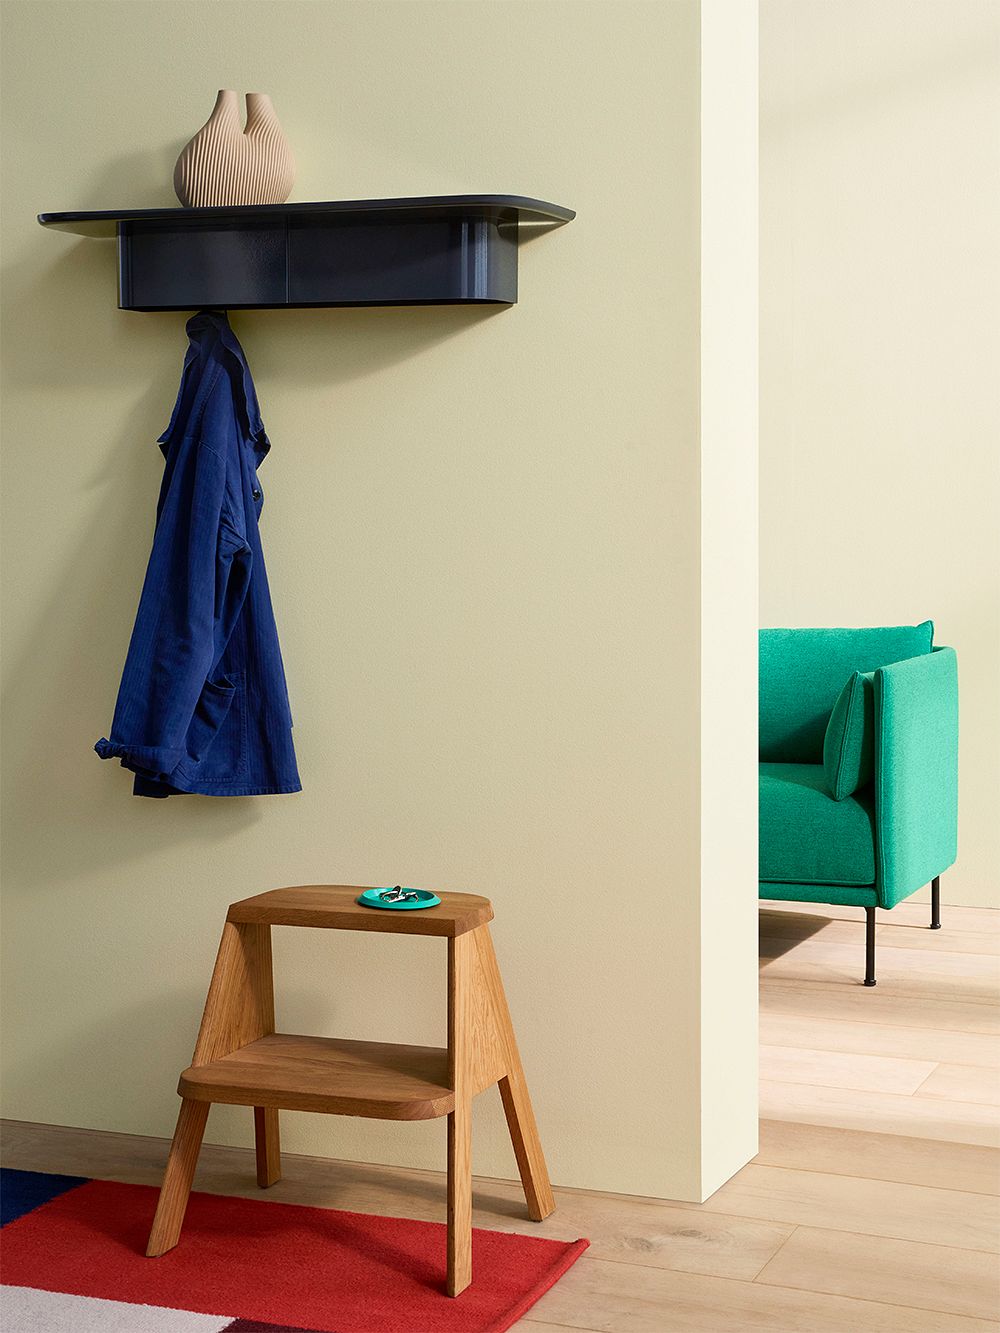 HAY's Korpus shelf on the hallway wall. There is a vase on top of the shelf, and a coat hangs on its hooks. Below is a wooden stepladder, and in the background is another room with a green sofa.